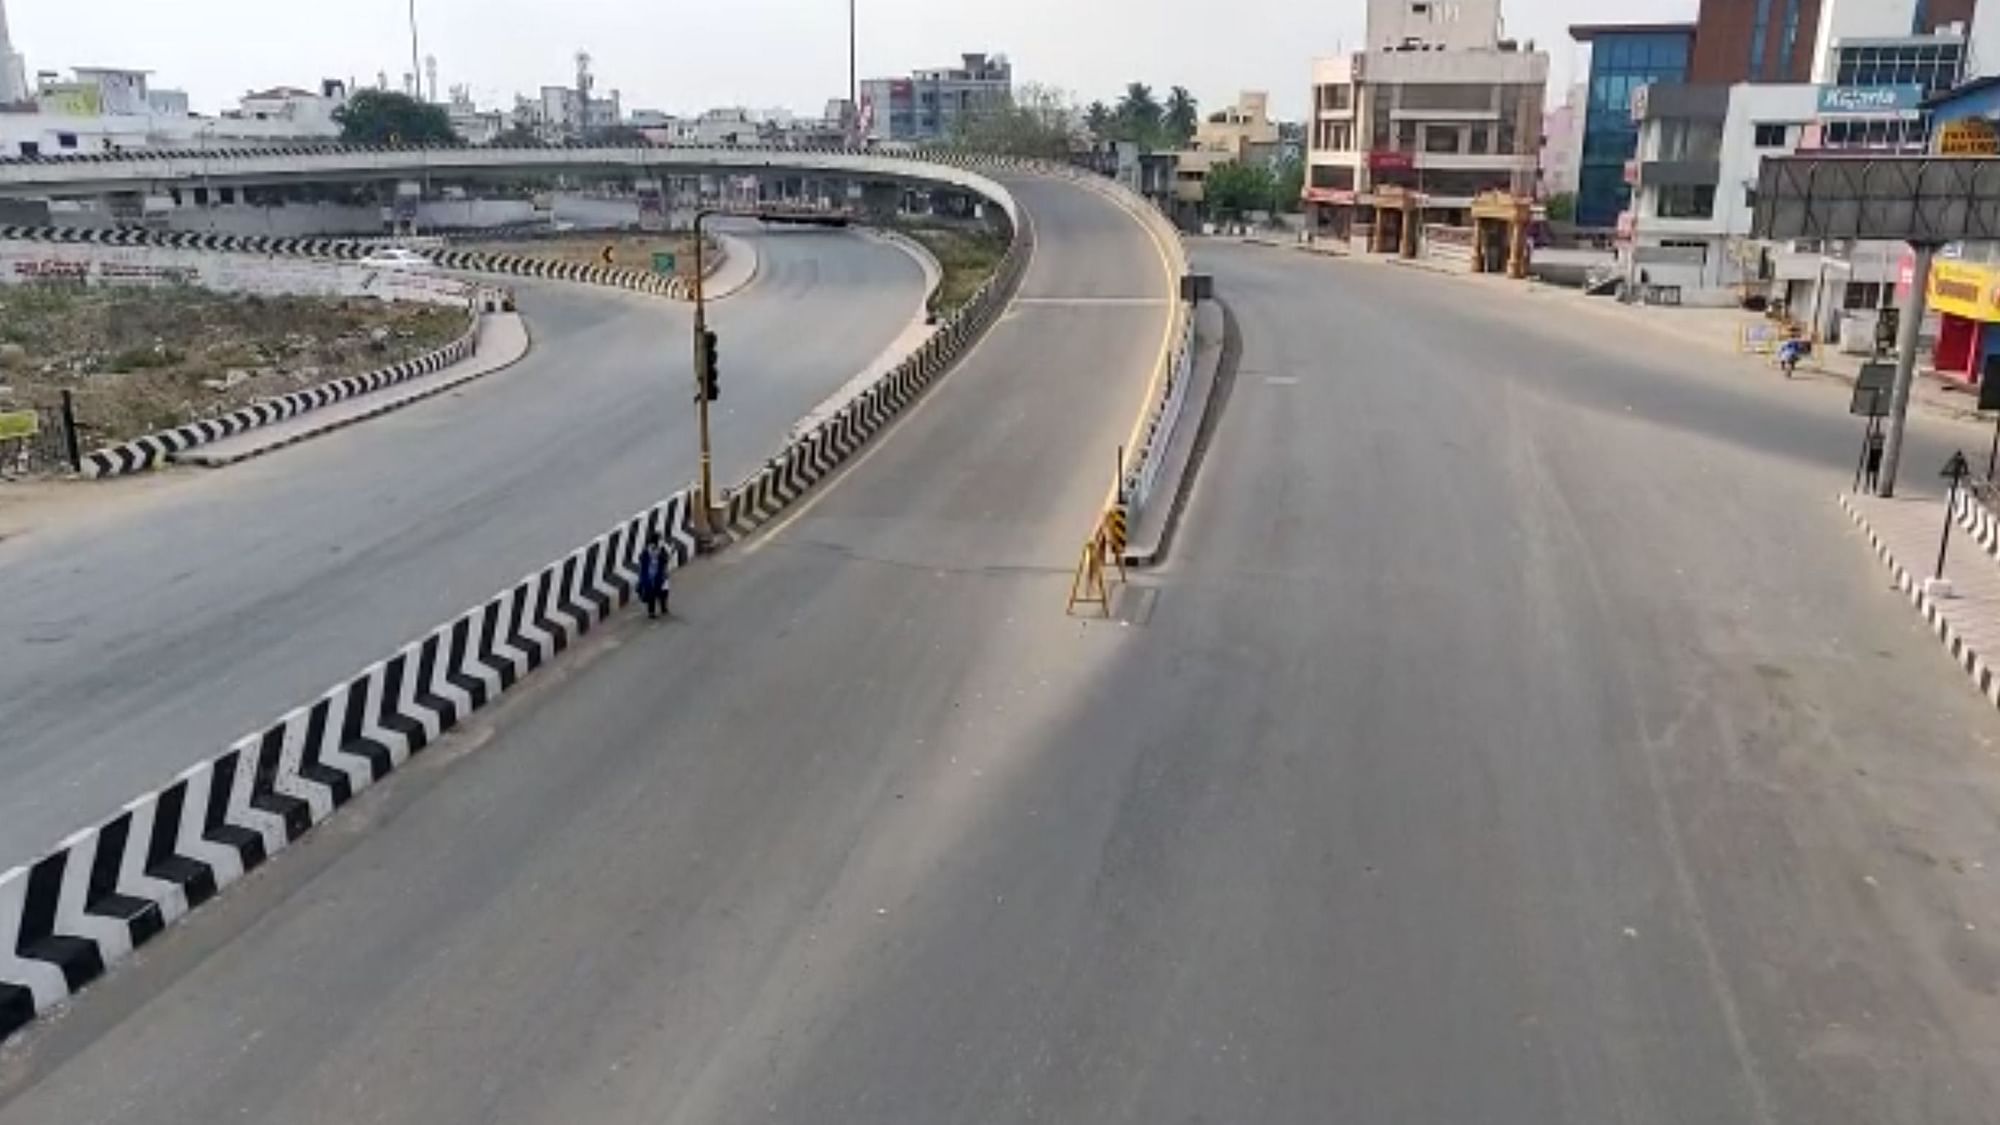 The streets in Chennai wear a deserted look due to the lockdown.